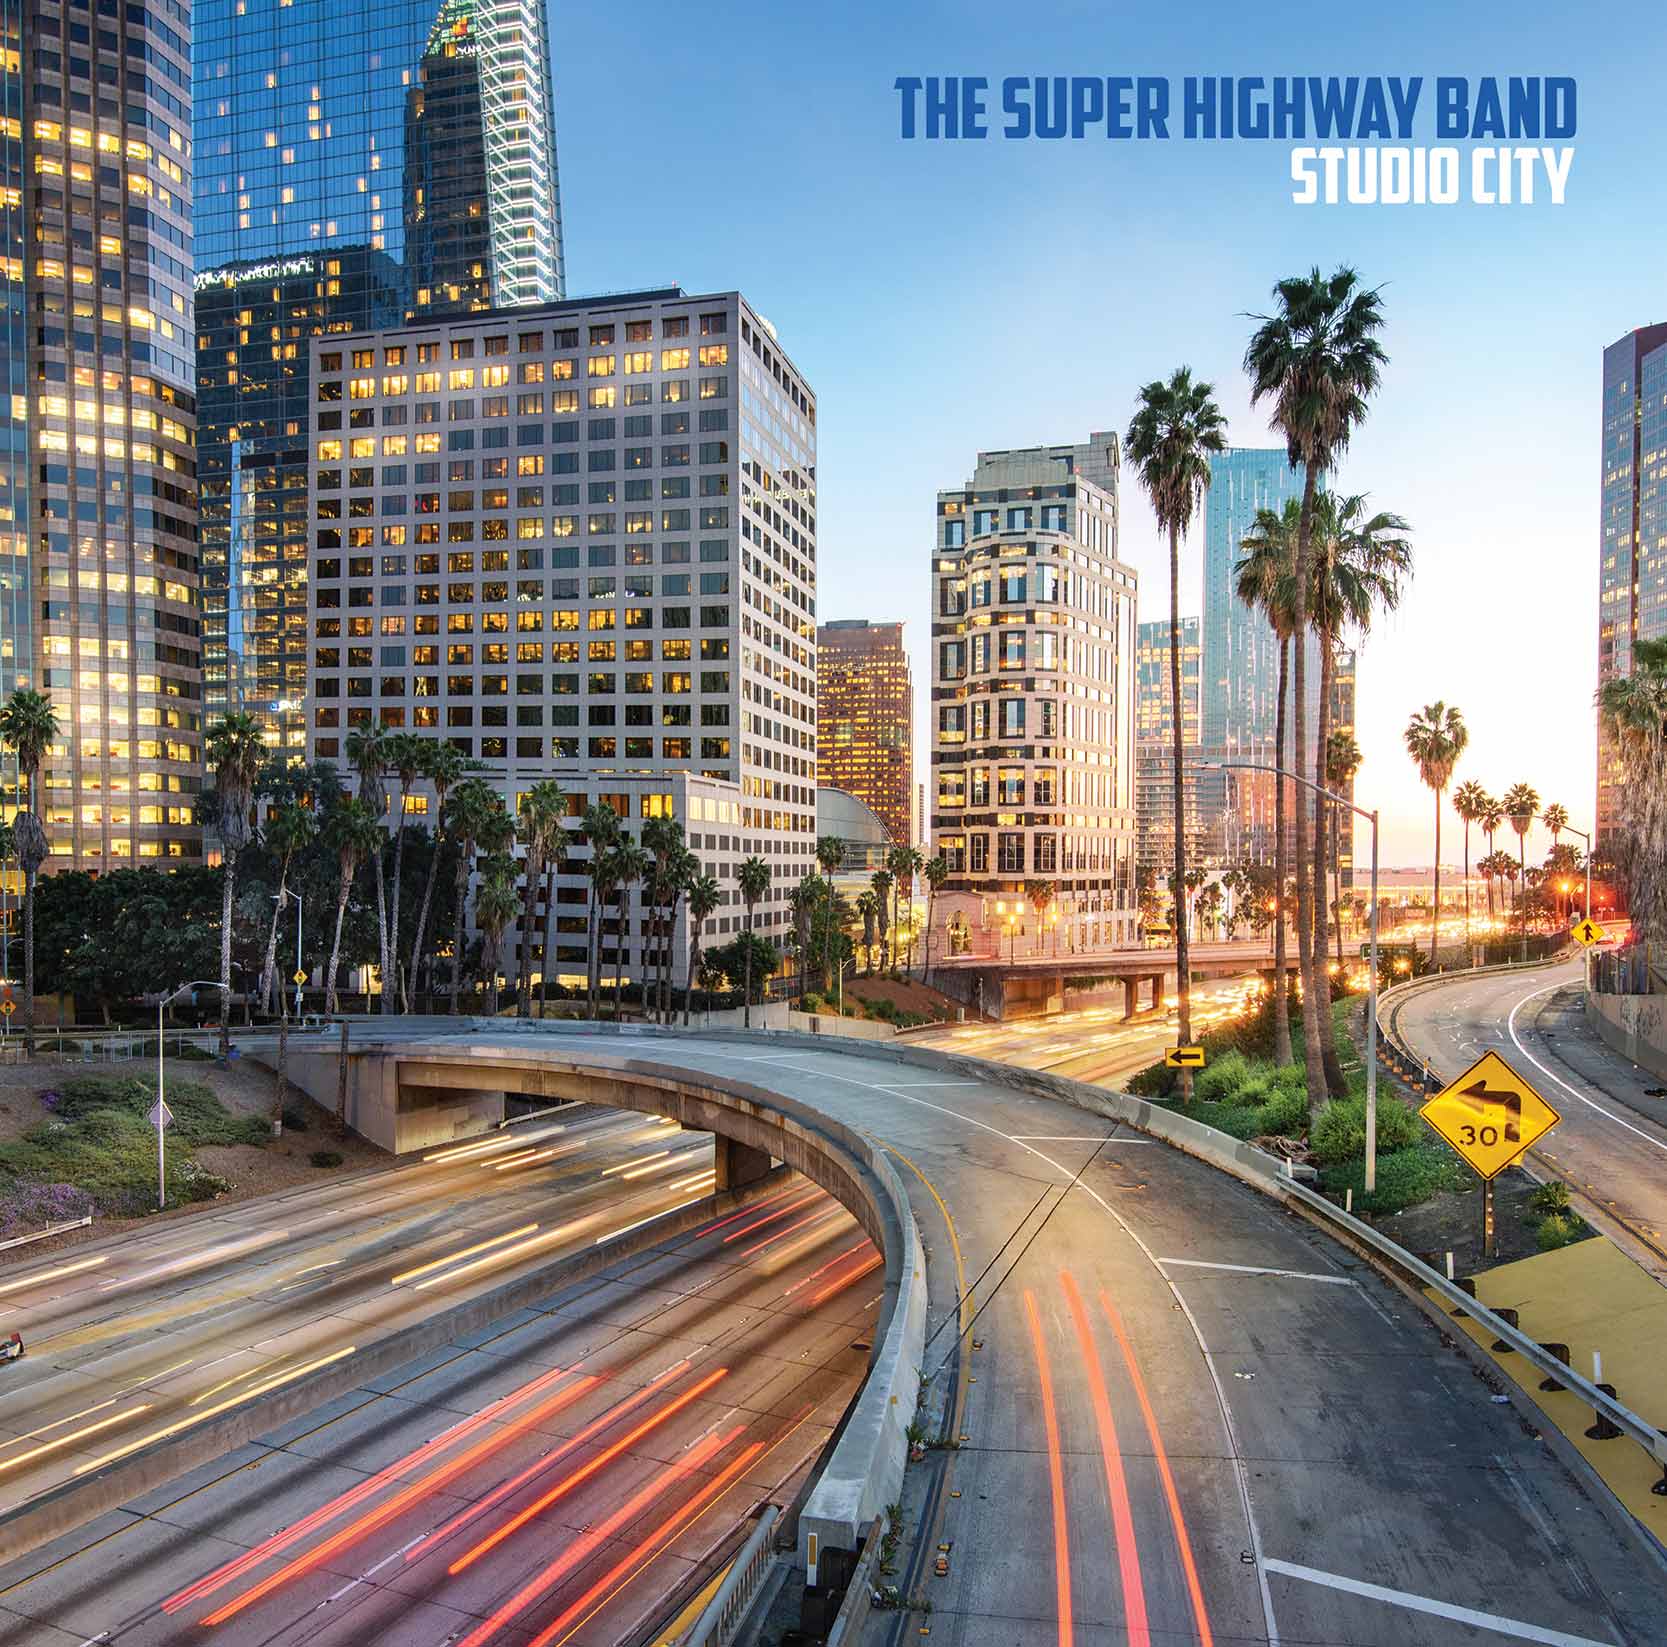 THE SUPERHIGHWAY BAND